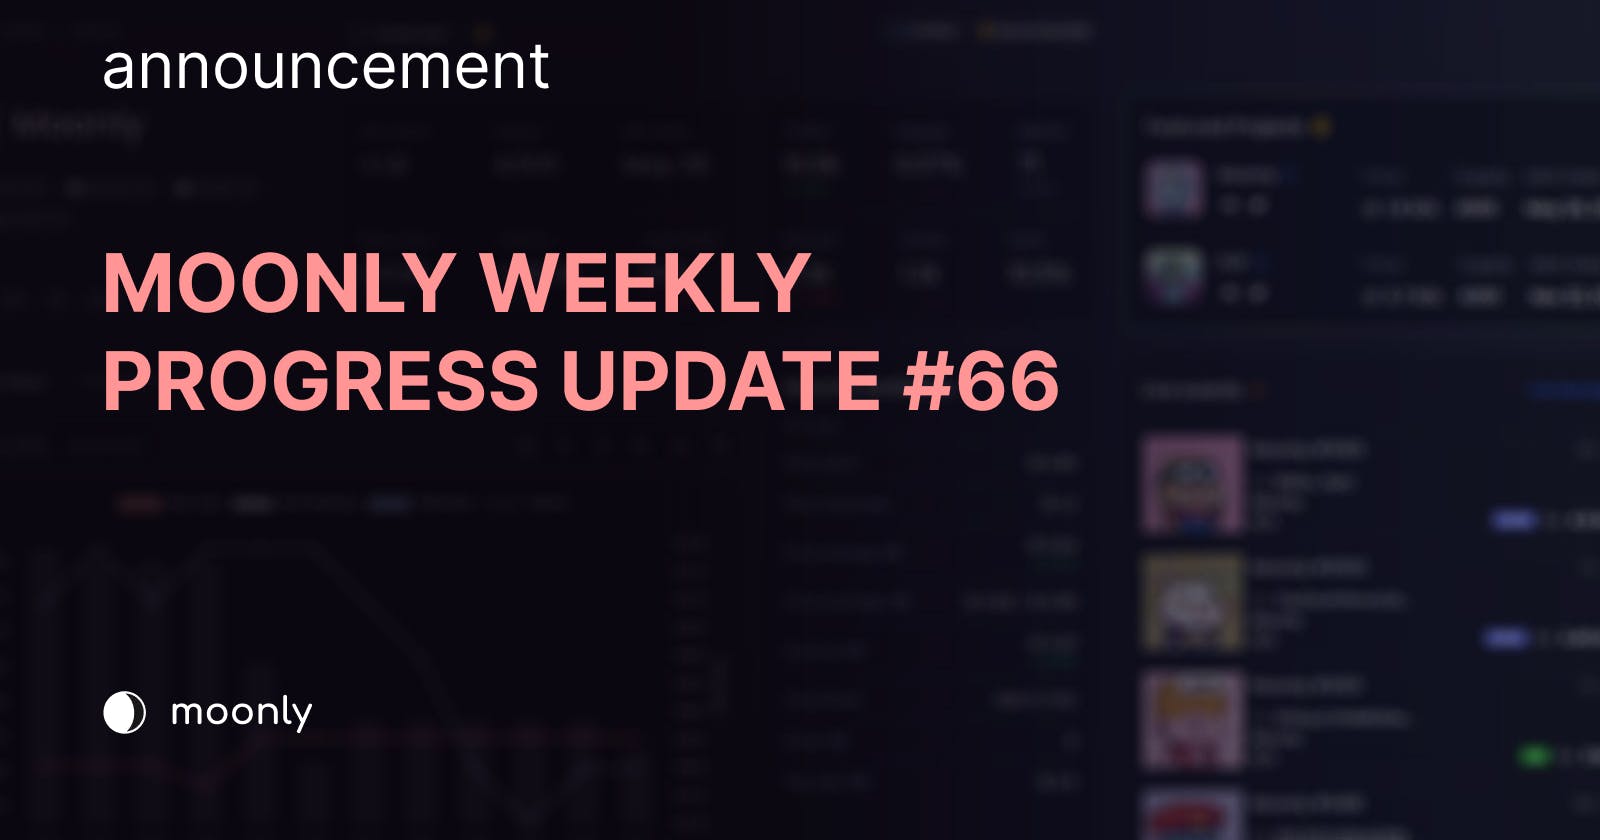 Moonly weekly progress update #66 - Upgraded Raffle Feature and Twitter Space Giveaway